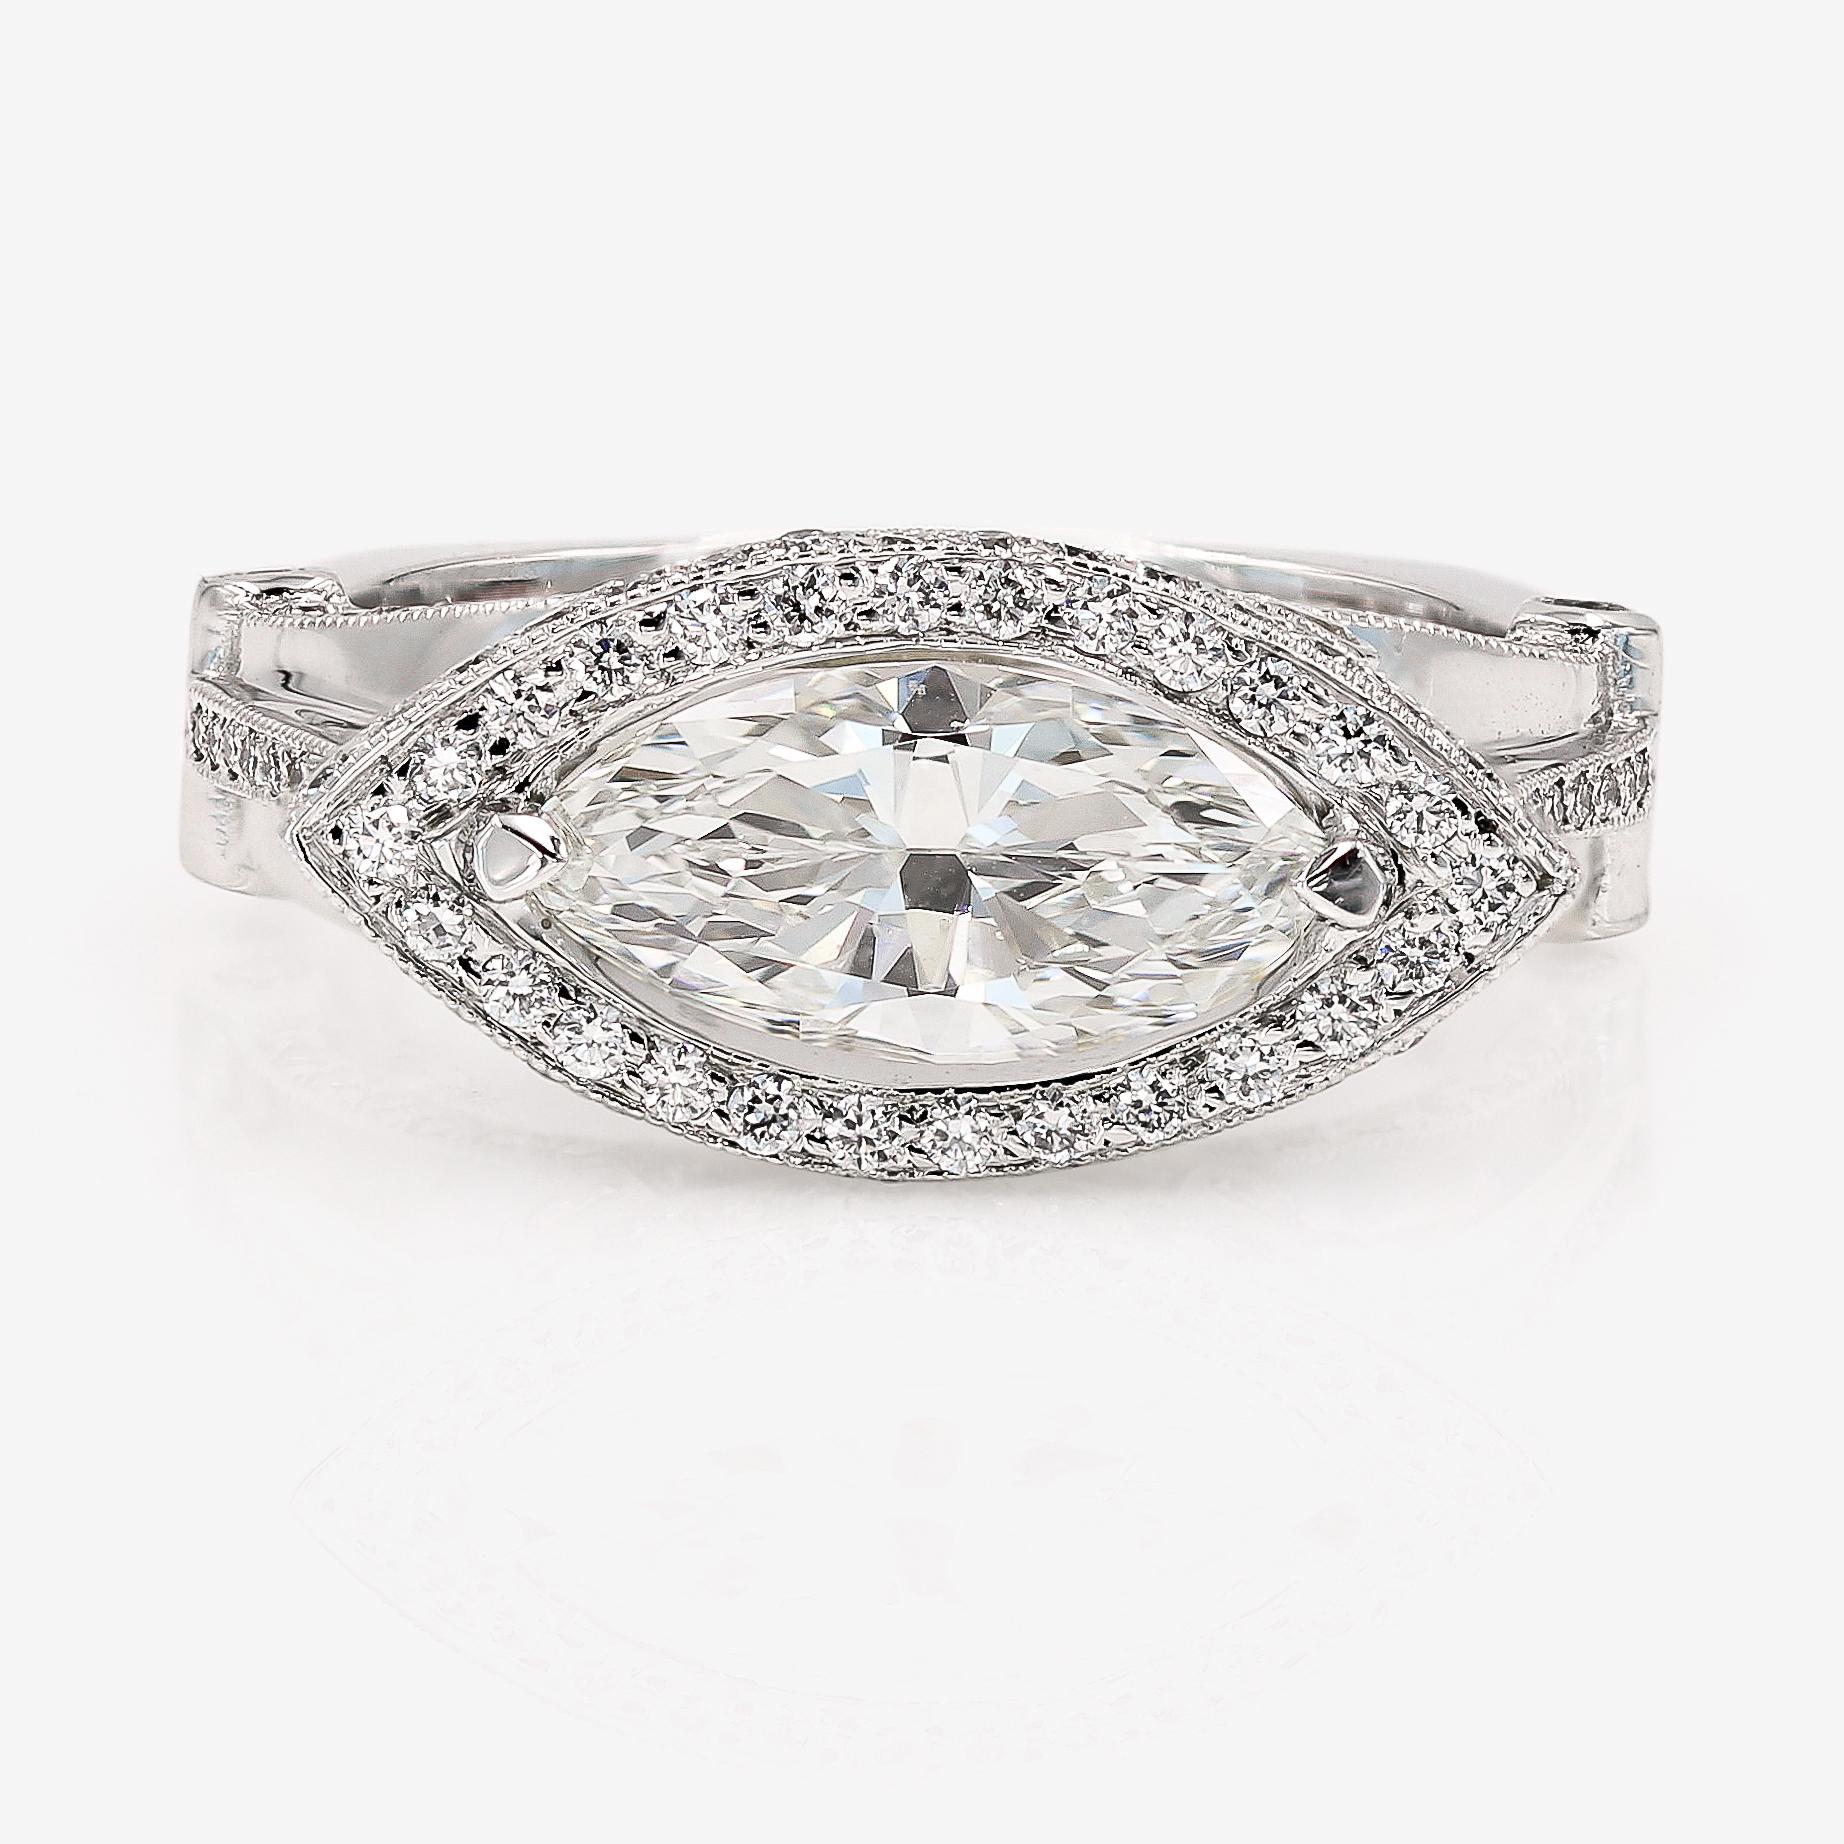 This Lester Lampert original setting in 18kt. white gold features a 1.42cts. marquise cut center that is H in color and VVS1 in clarity. The center is set sideways and is surrounded by 138 ideal cut round diamonds=.85ct. t.w. The round diamonds are